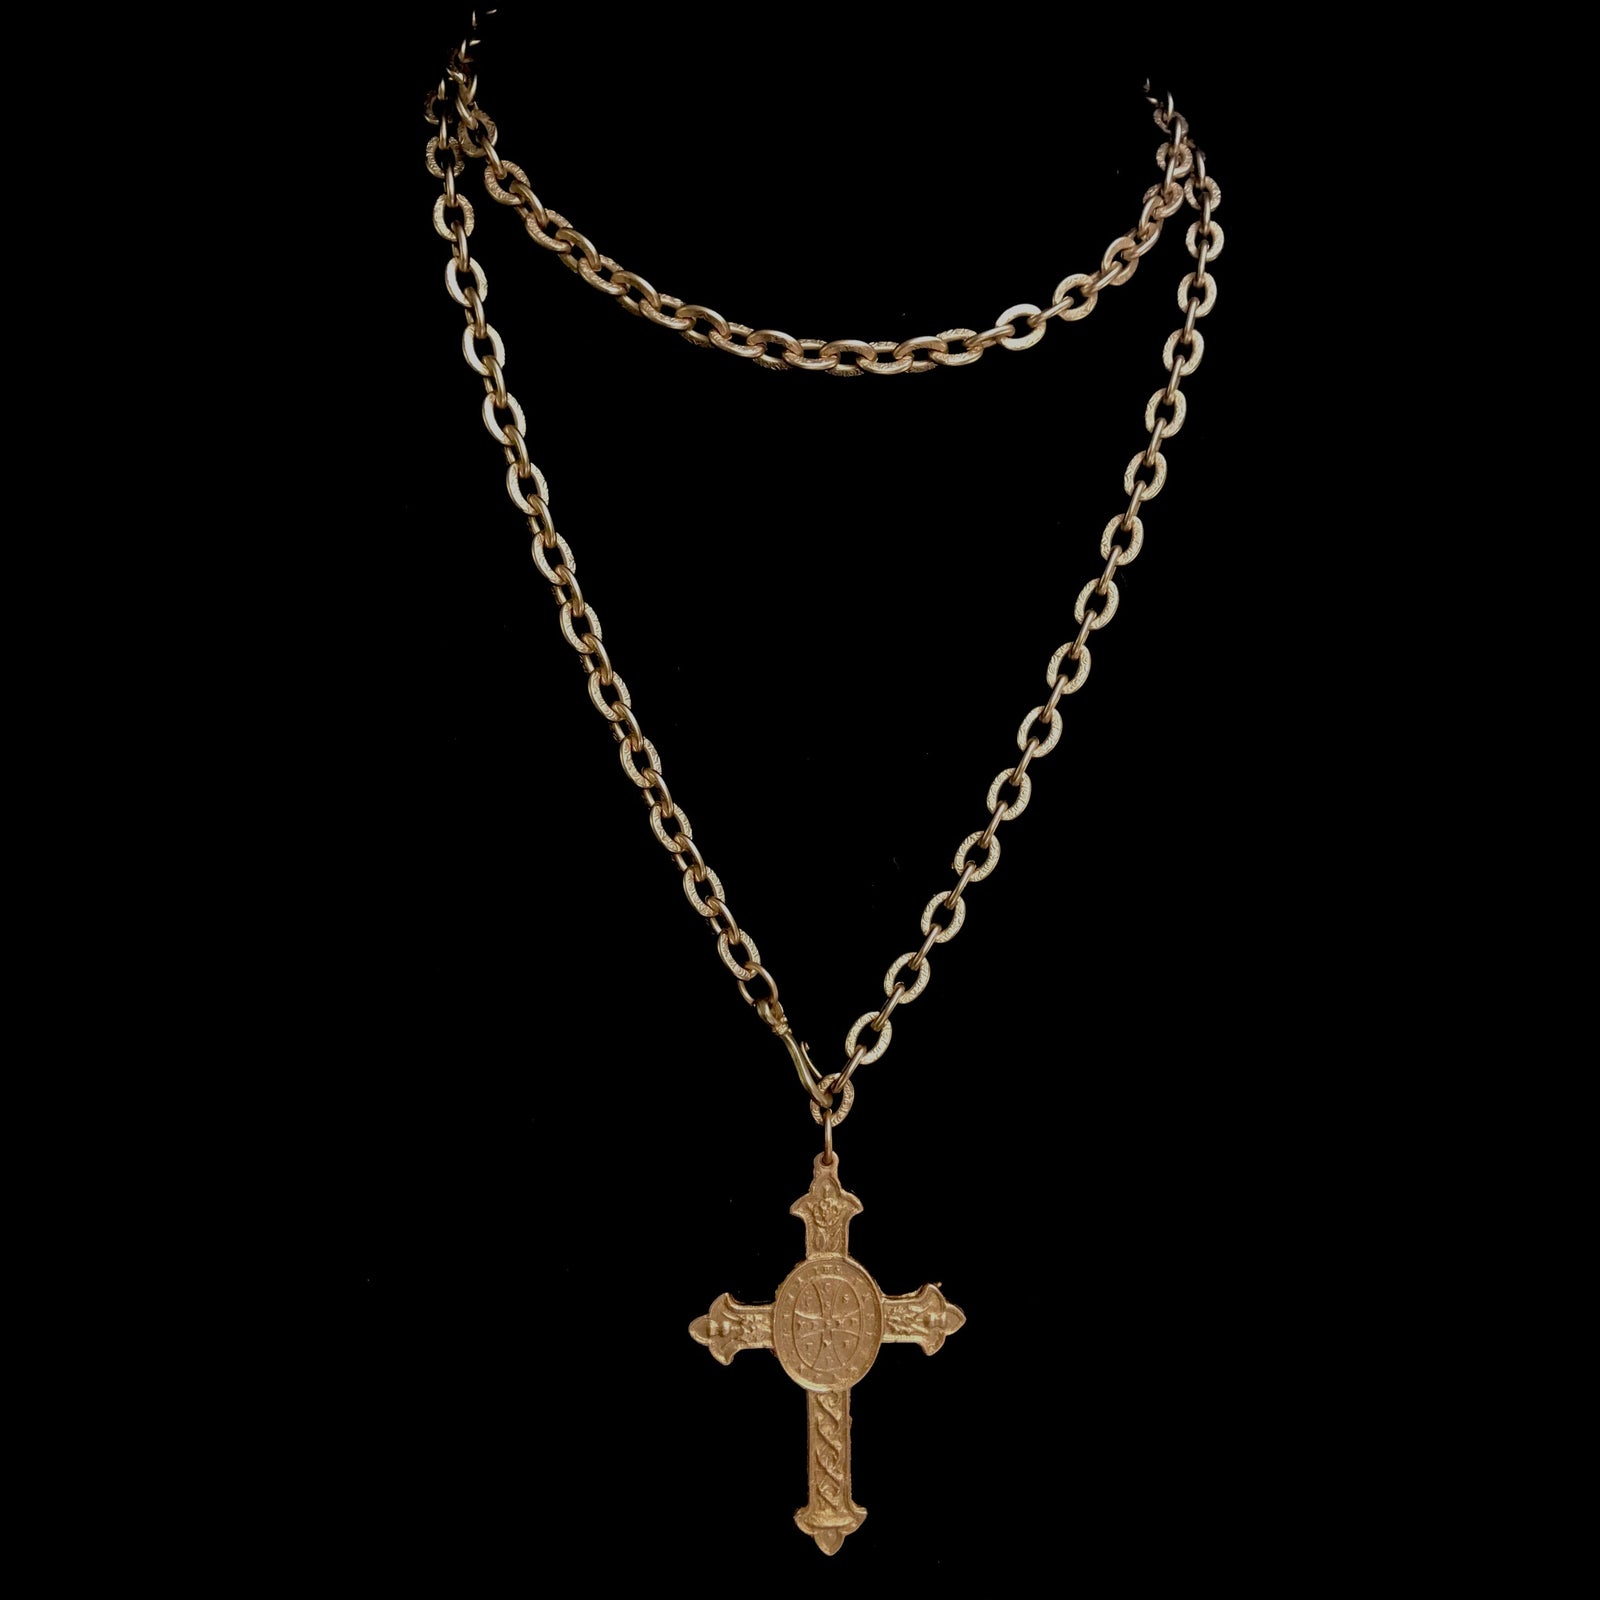 Gold Cross Pendant Jesus Crucifix Frame Italian Figaro Link Chain Gold  Cross Necklace 9K Solid Fine Yellow THA From Fjxp7, $16.34 | DHgate.Com